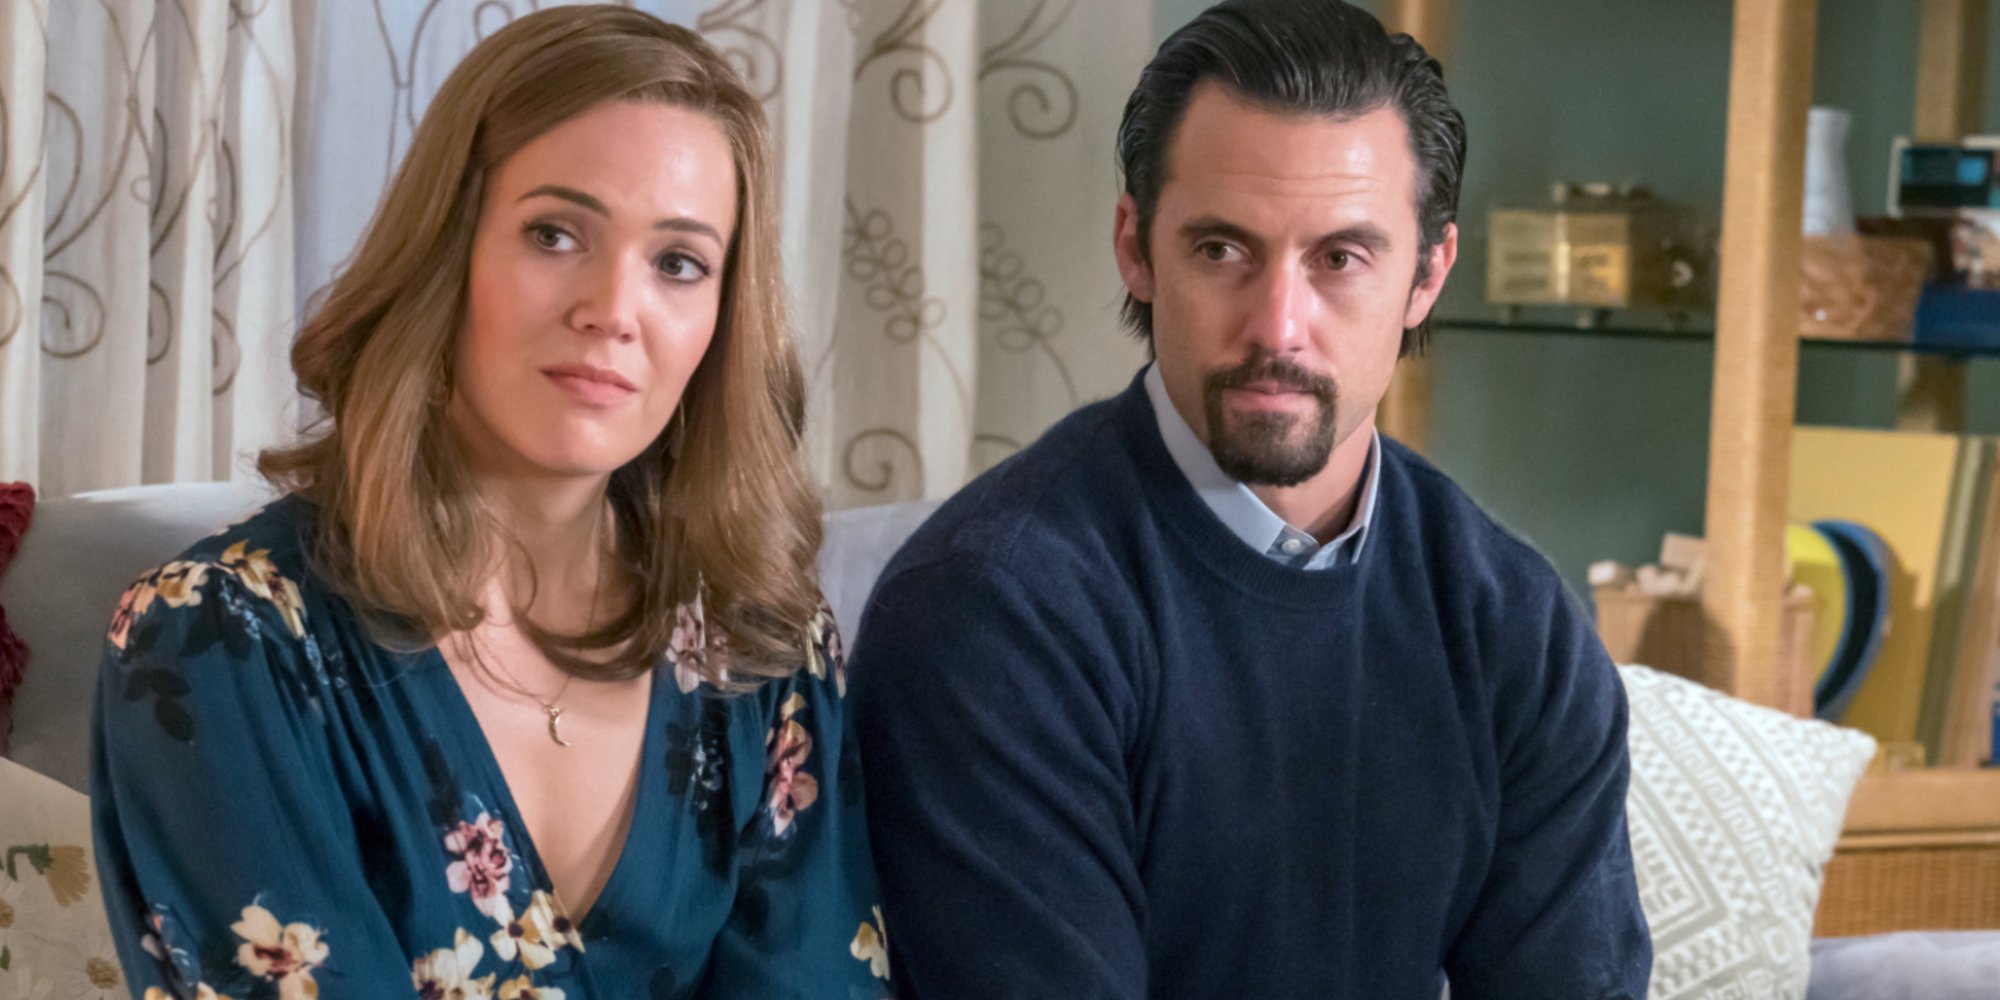 'This Is Us' cast includes Mandy Moore and Milo Ventimglia, seen here in a season 2 photograph.